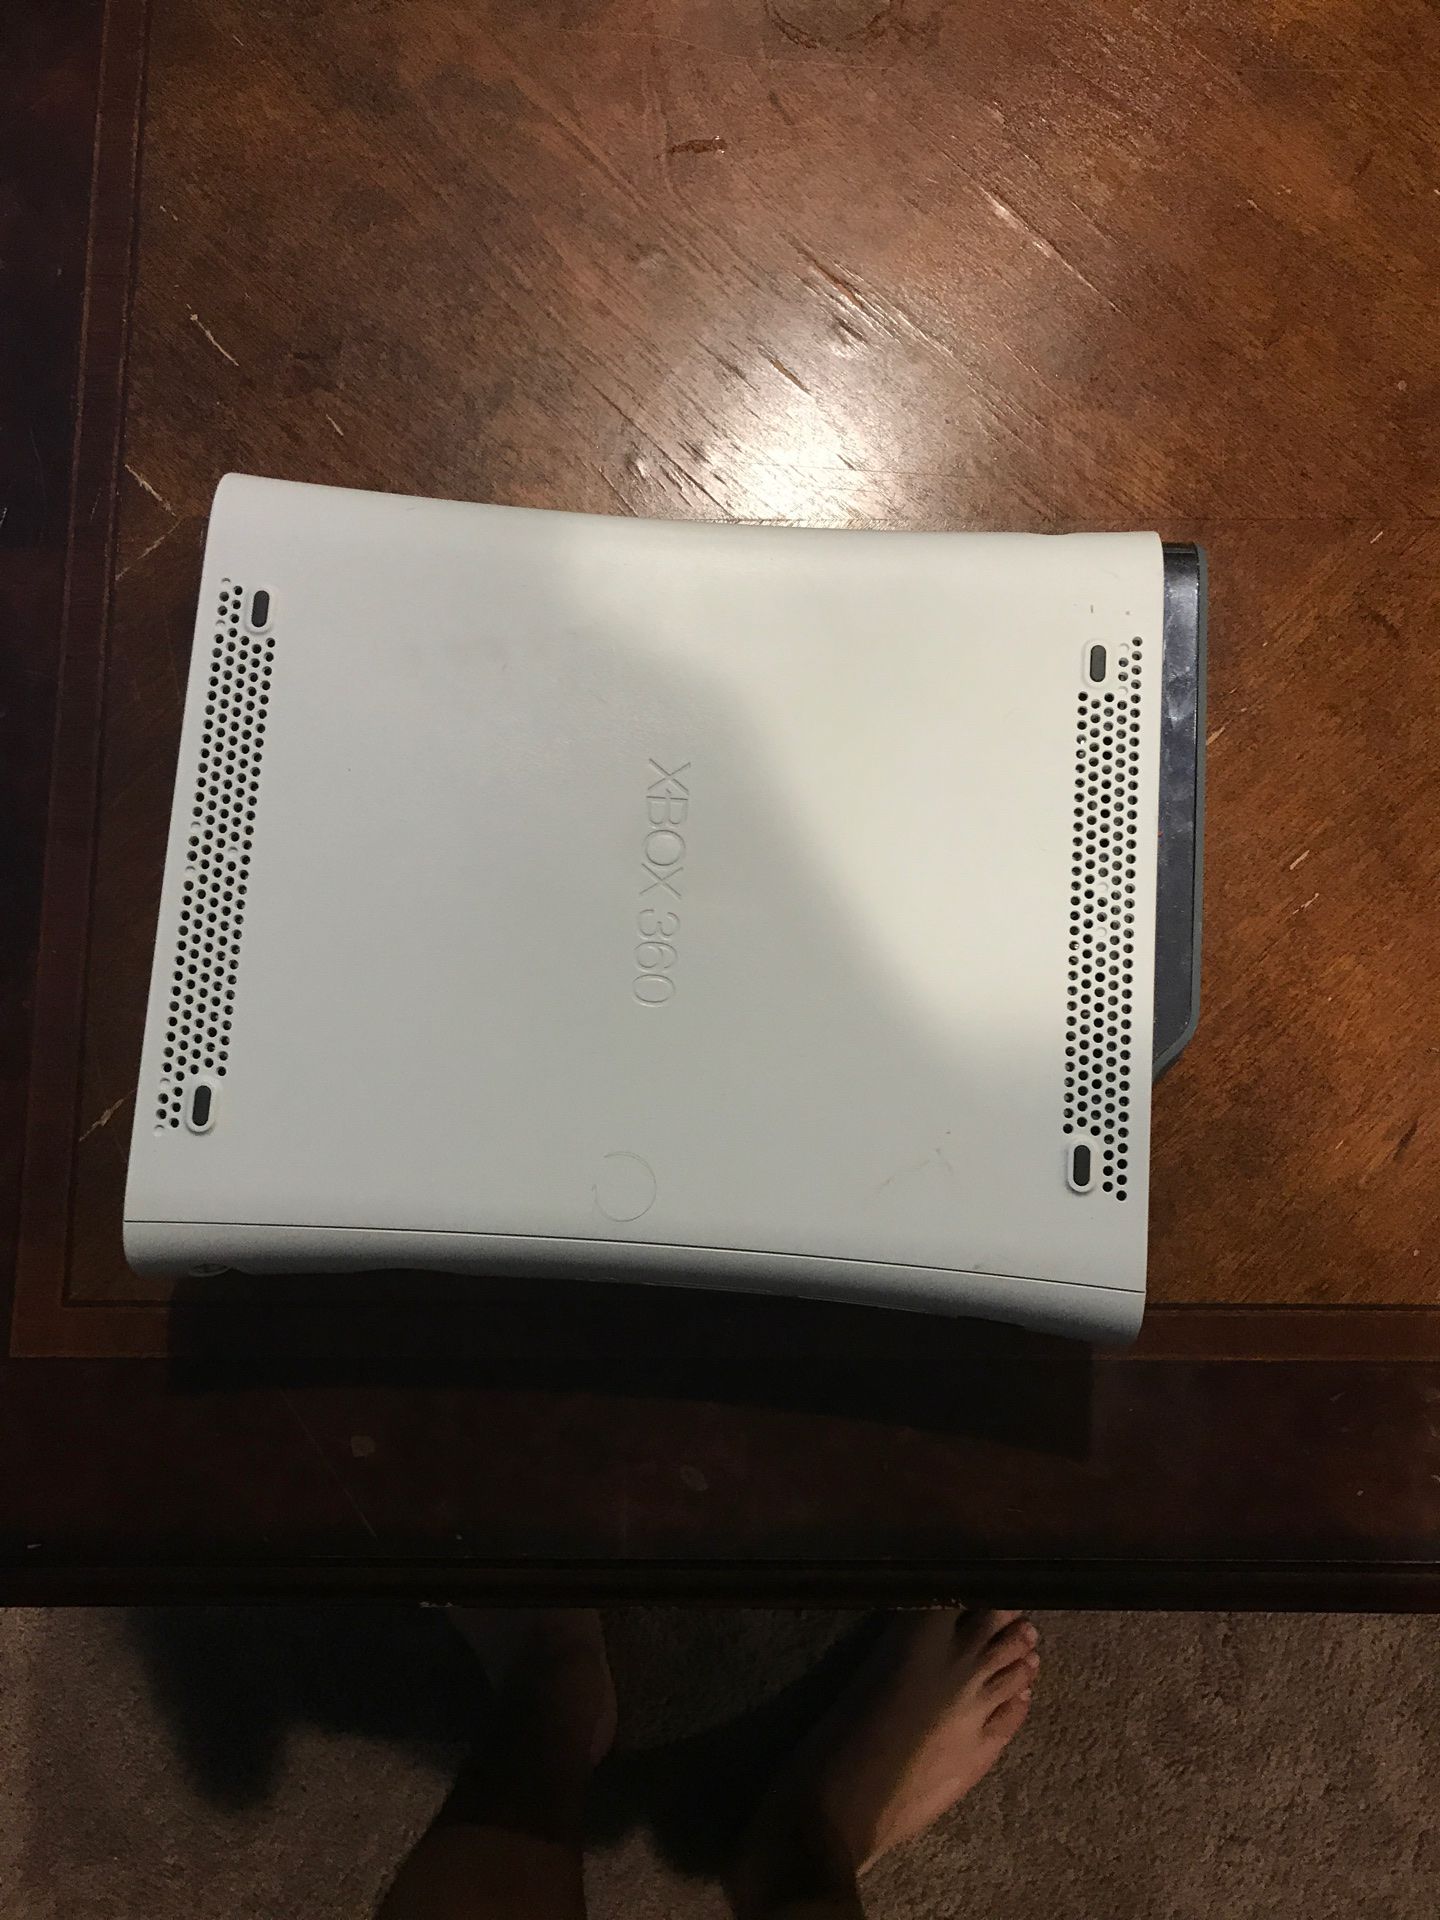 Xbox 360 and AirPods case